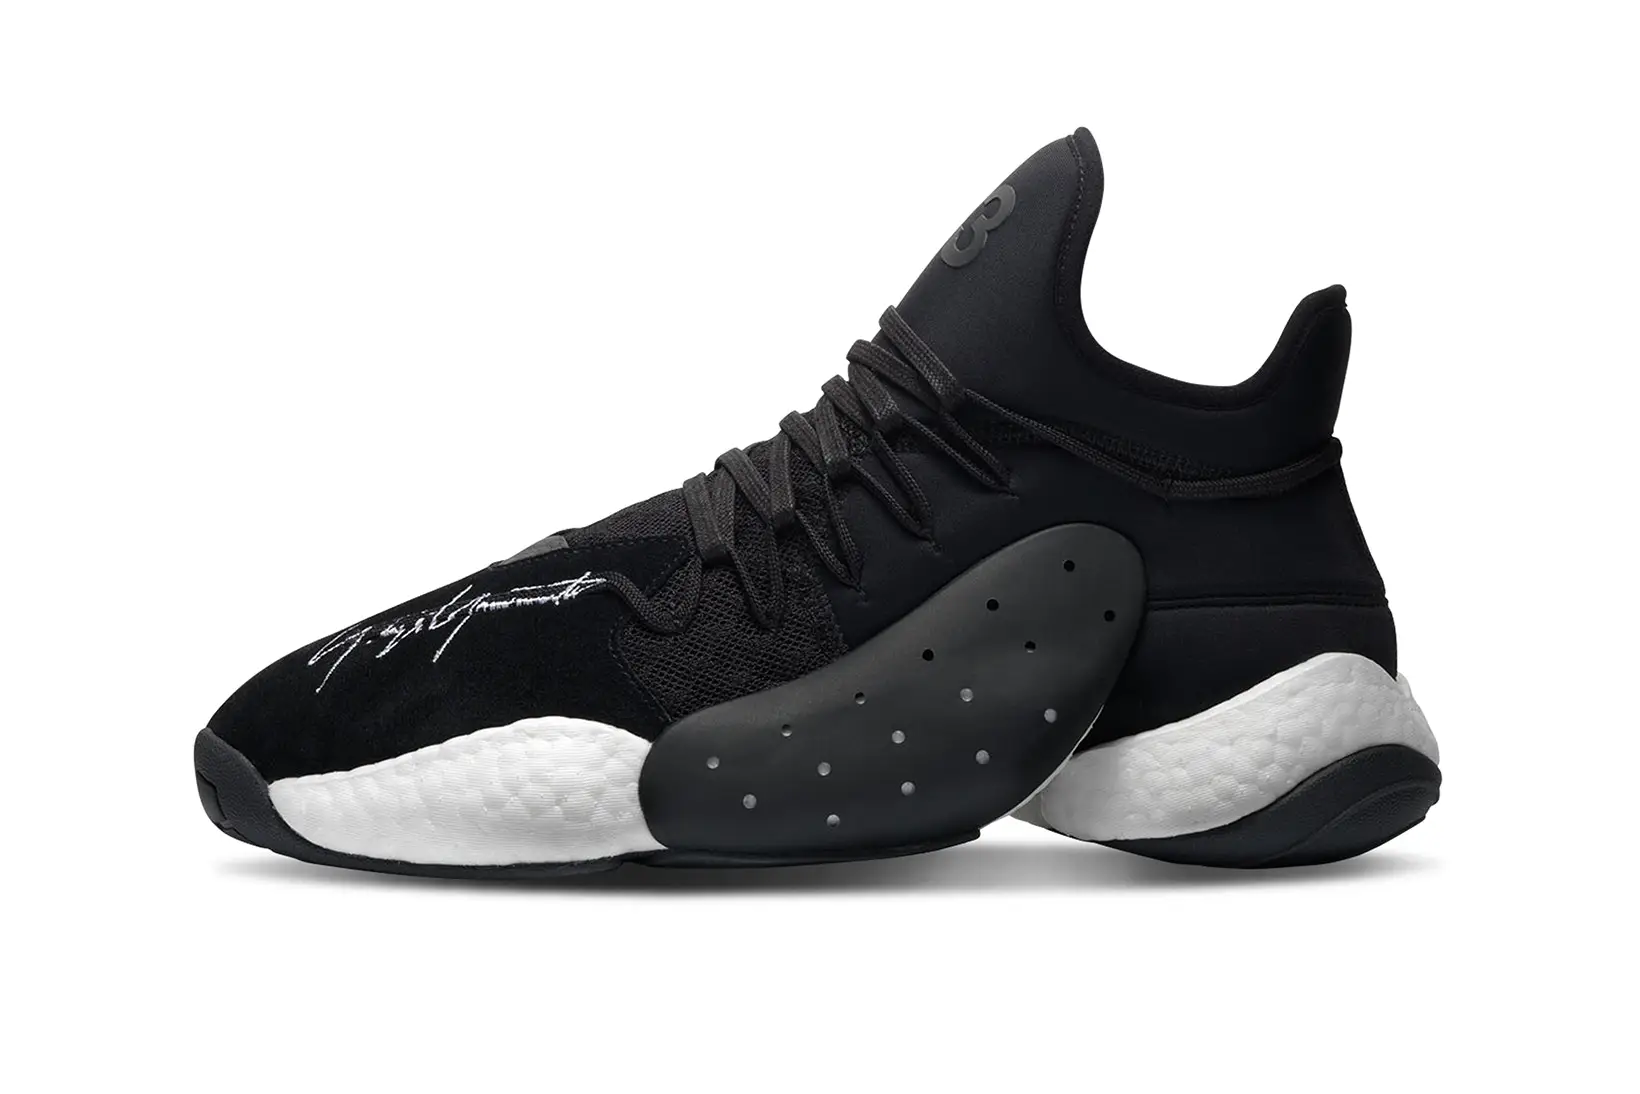 A Full Look At The adidas Y-3 x James Harden Sneaker Collection | The ...